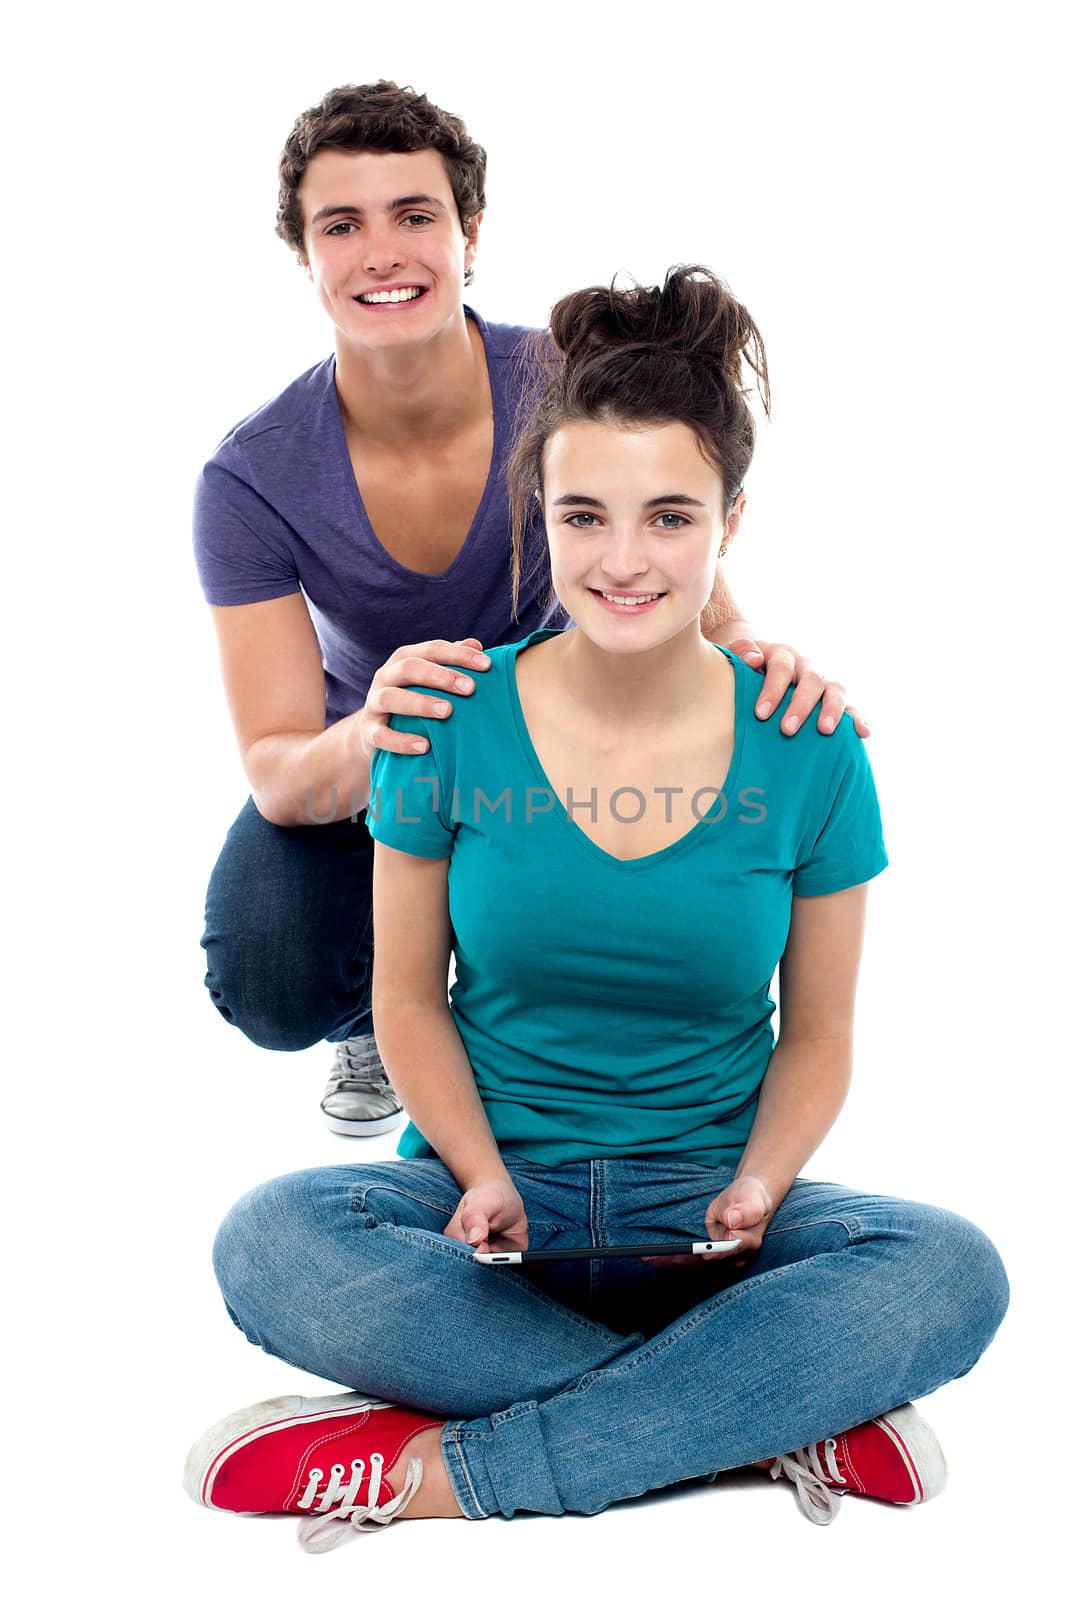 Studio shot of charming young couple. Girl holding tablet pc